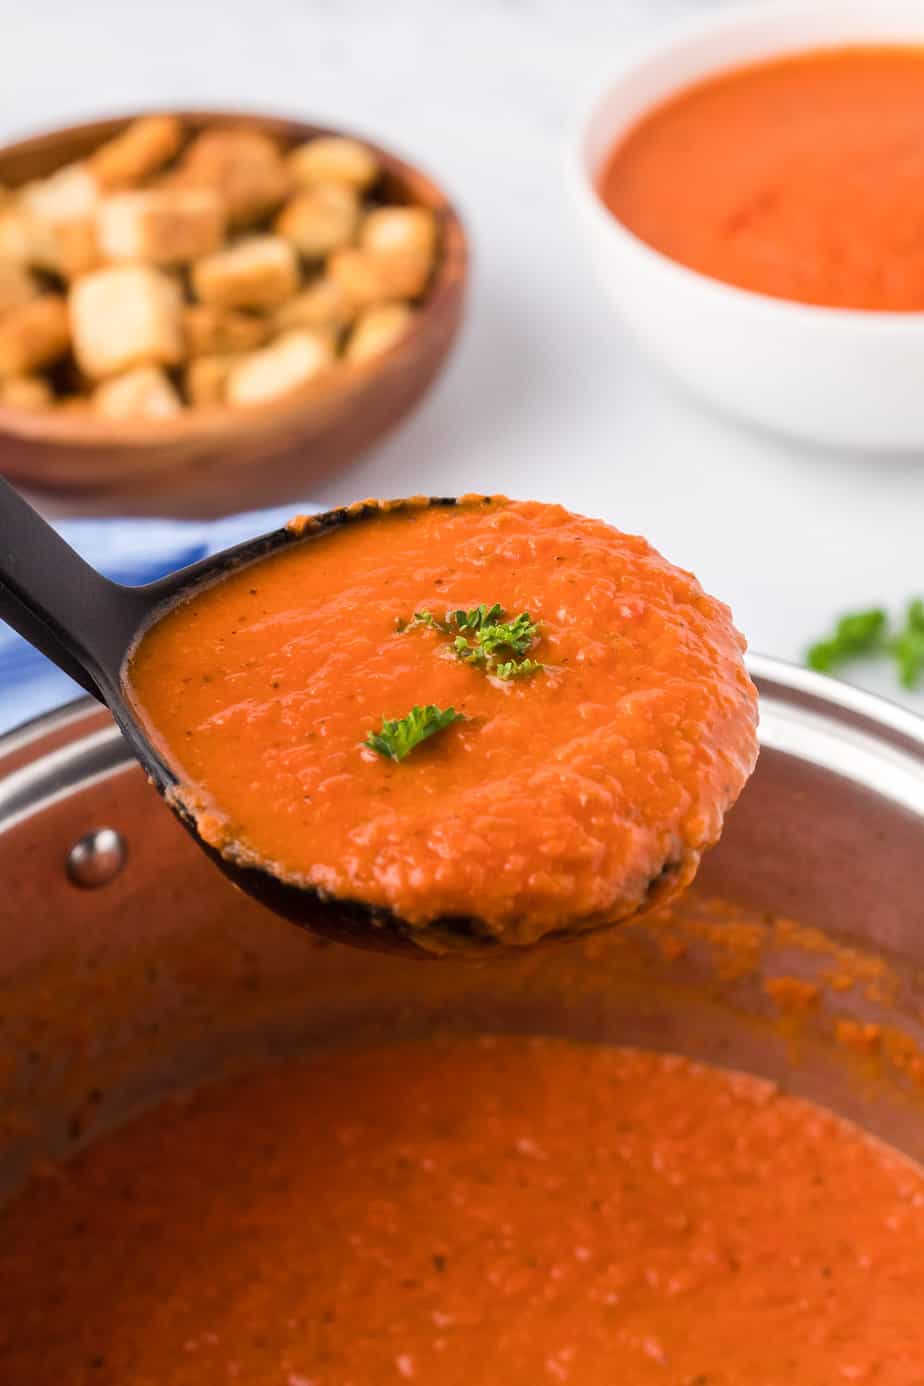 A ladle full of tomato soup from the side being lifted from the pot with a bowl of tomato soup and a bowl of croutons in the background.